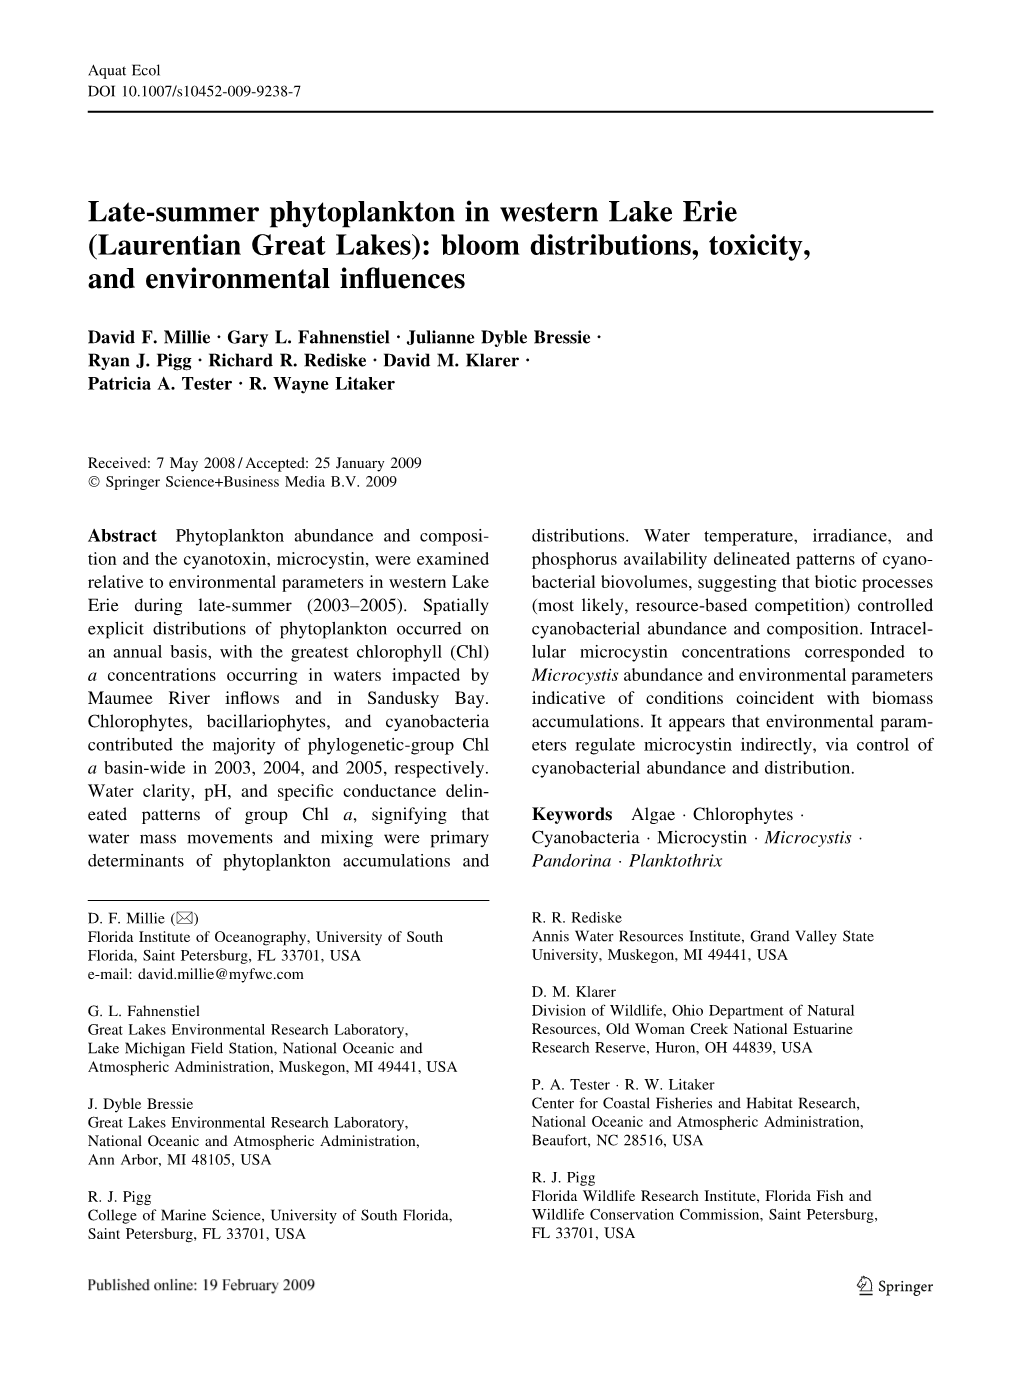 Late-Summer Phytoplankton in Western Lake Erie (Laurentian Great Lakes): Bloom Distributions, Toxicity, and Environmental Inﬂuences